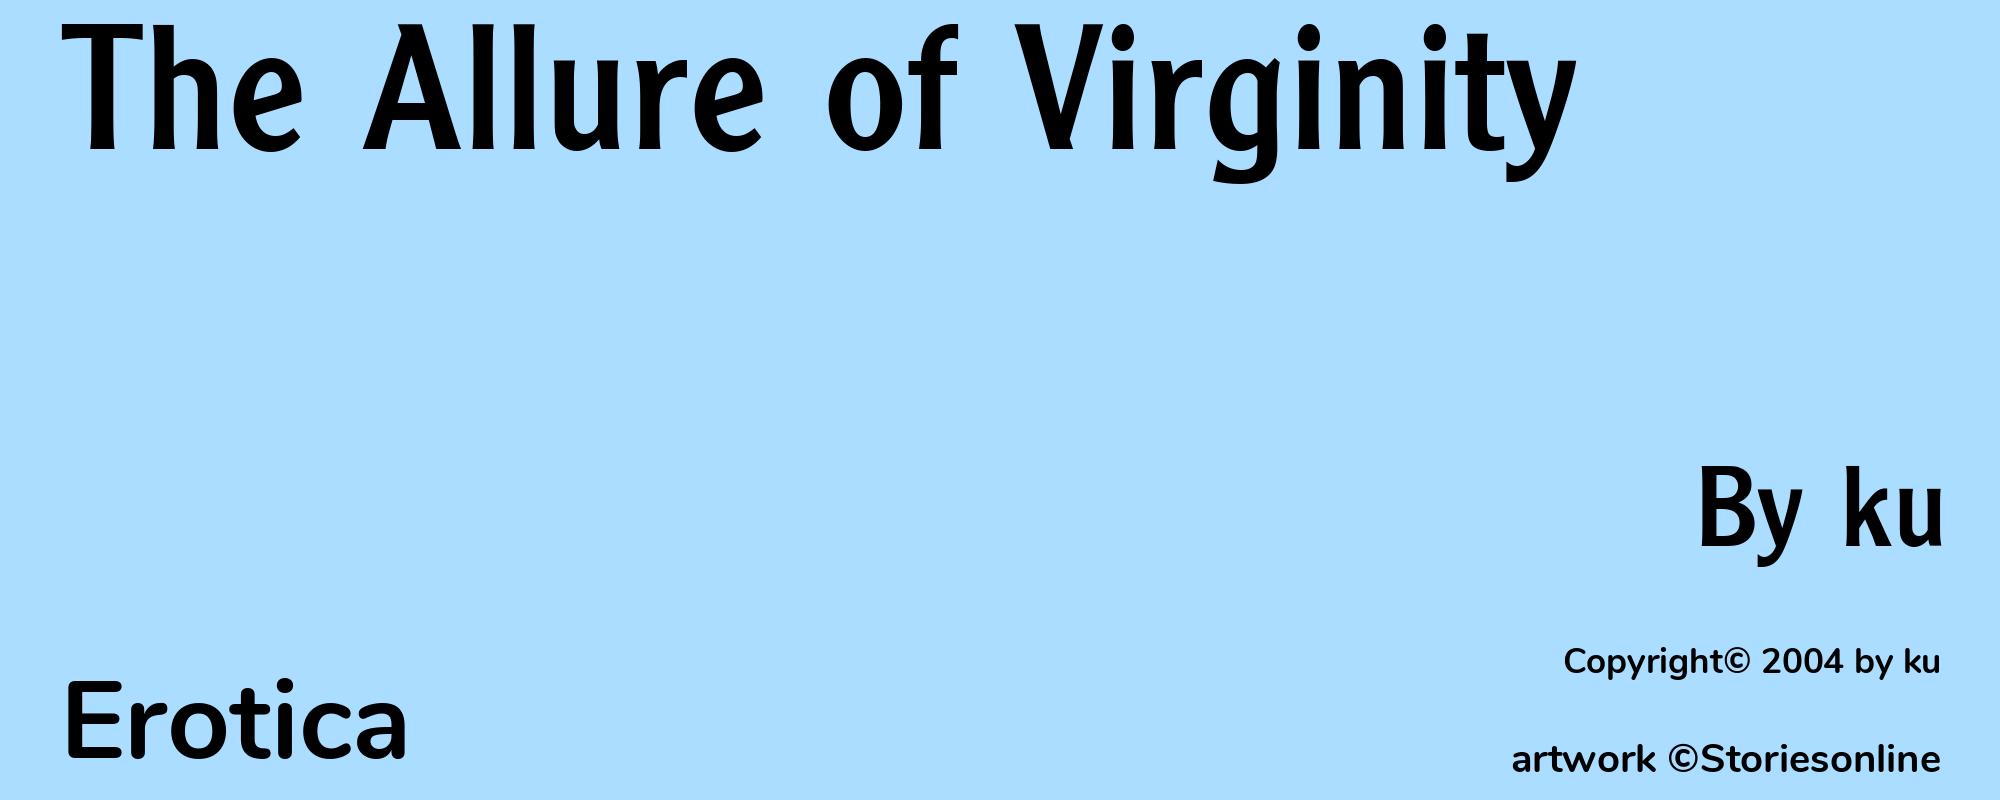 The Allure of Virginity - Cover